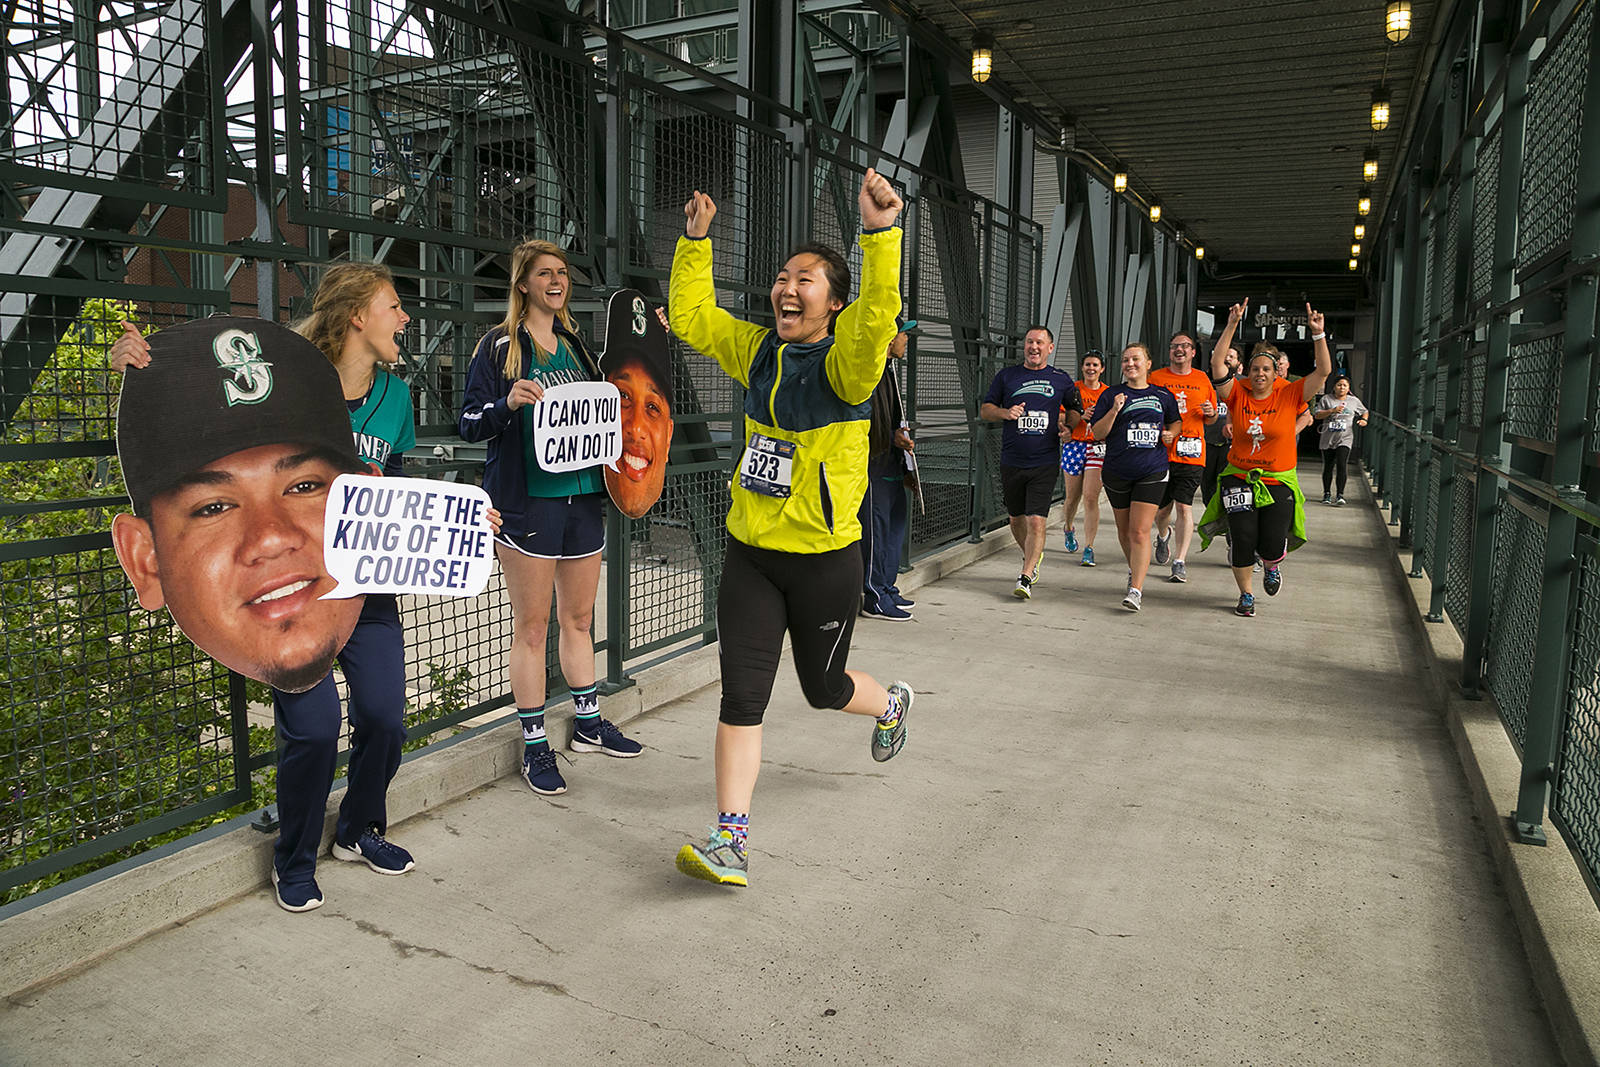 The Refuse to Abuse 5k, at Safeco Field July 21, supports the Washington State Coalition Against Domestic Violence. Ben VanHouten photo